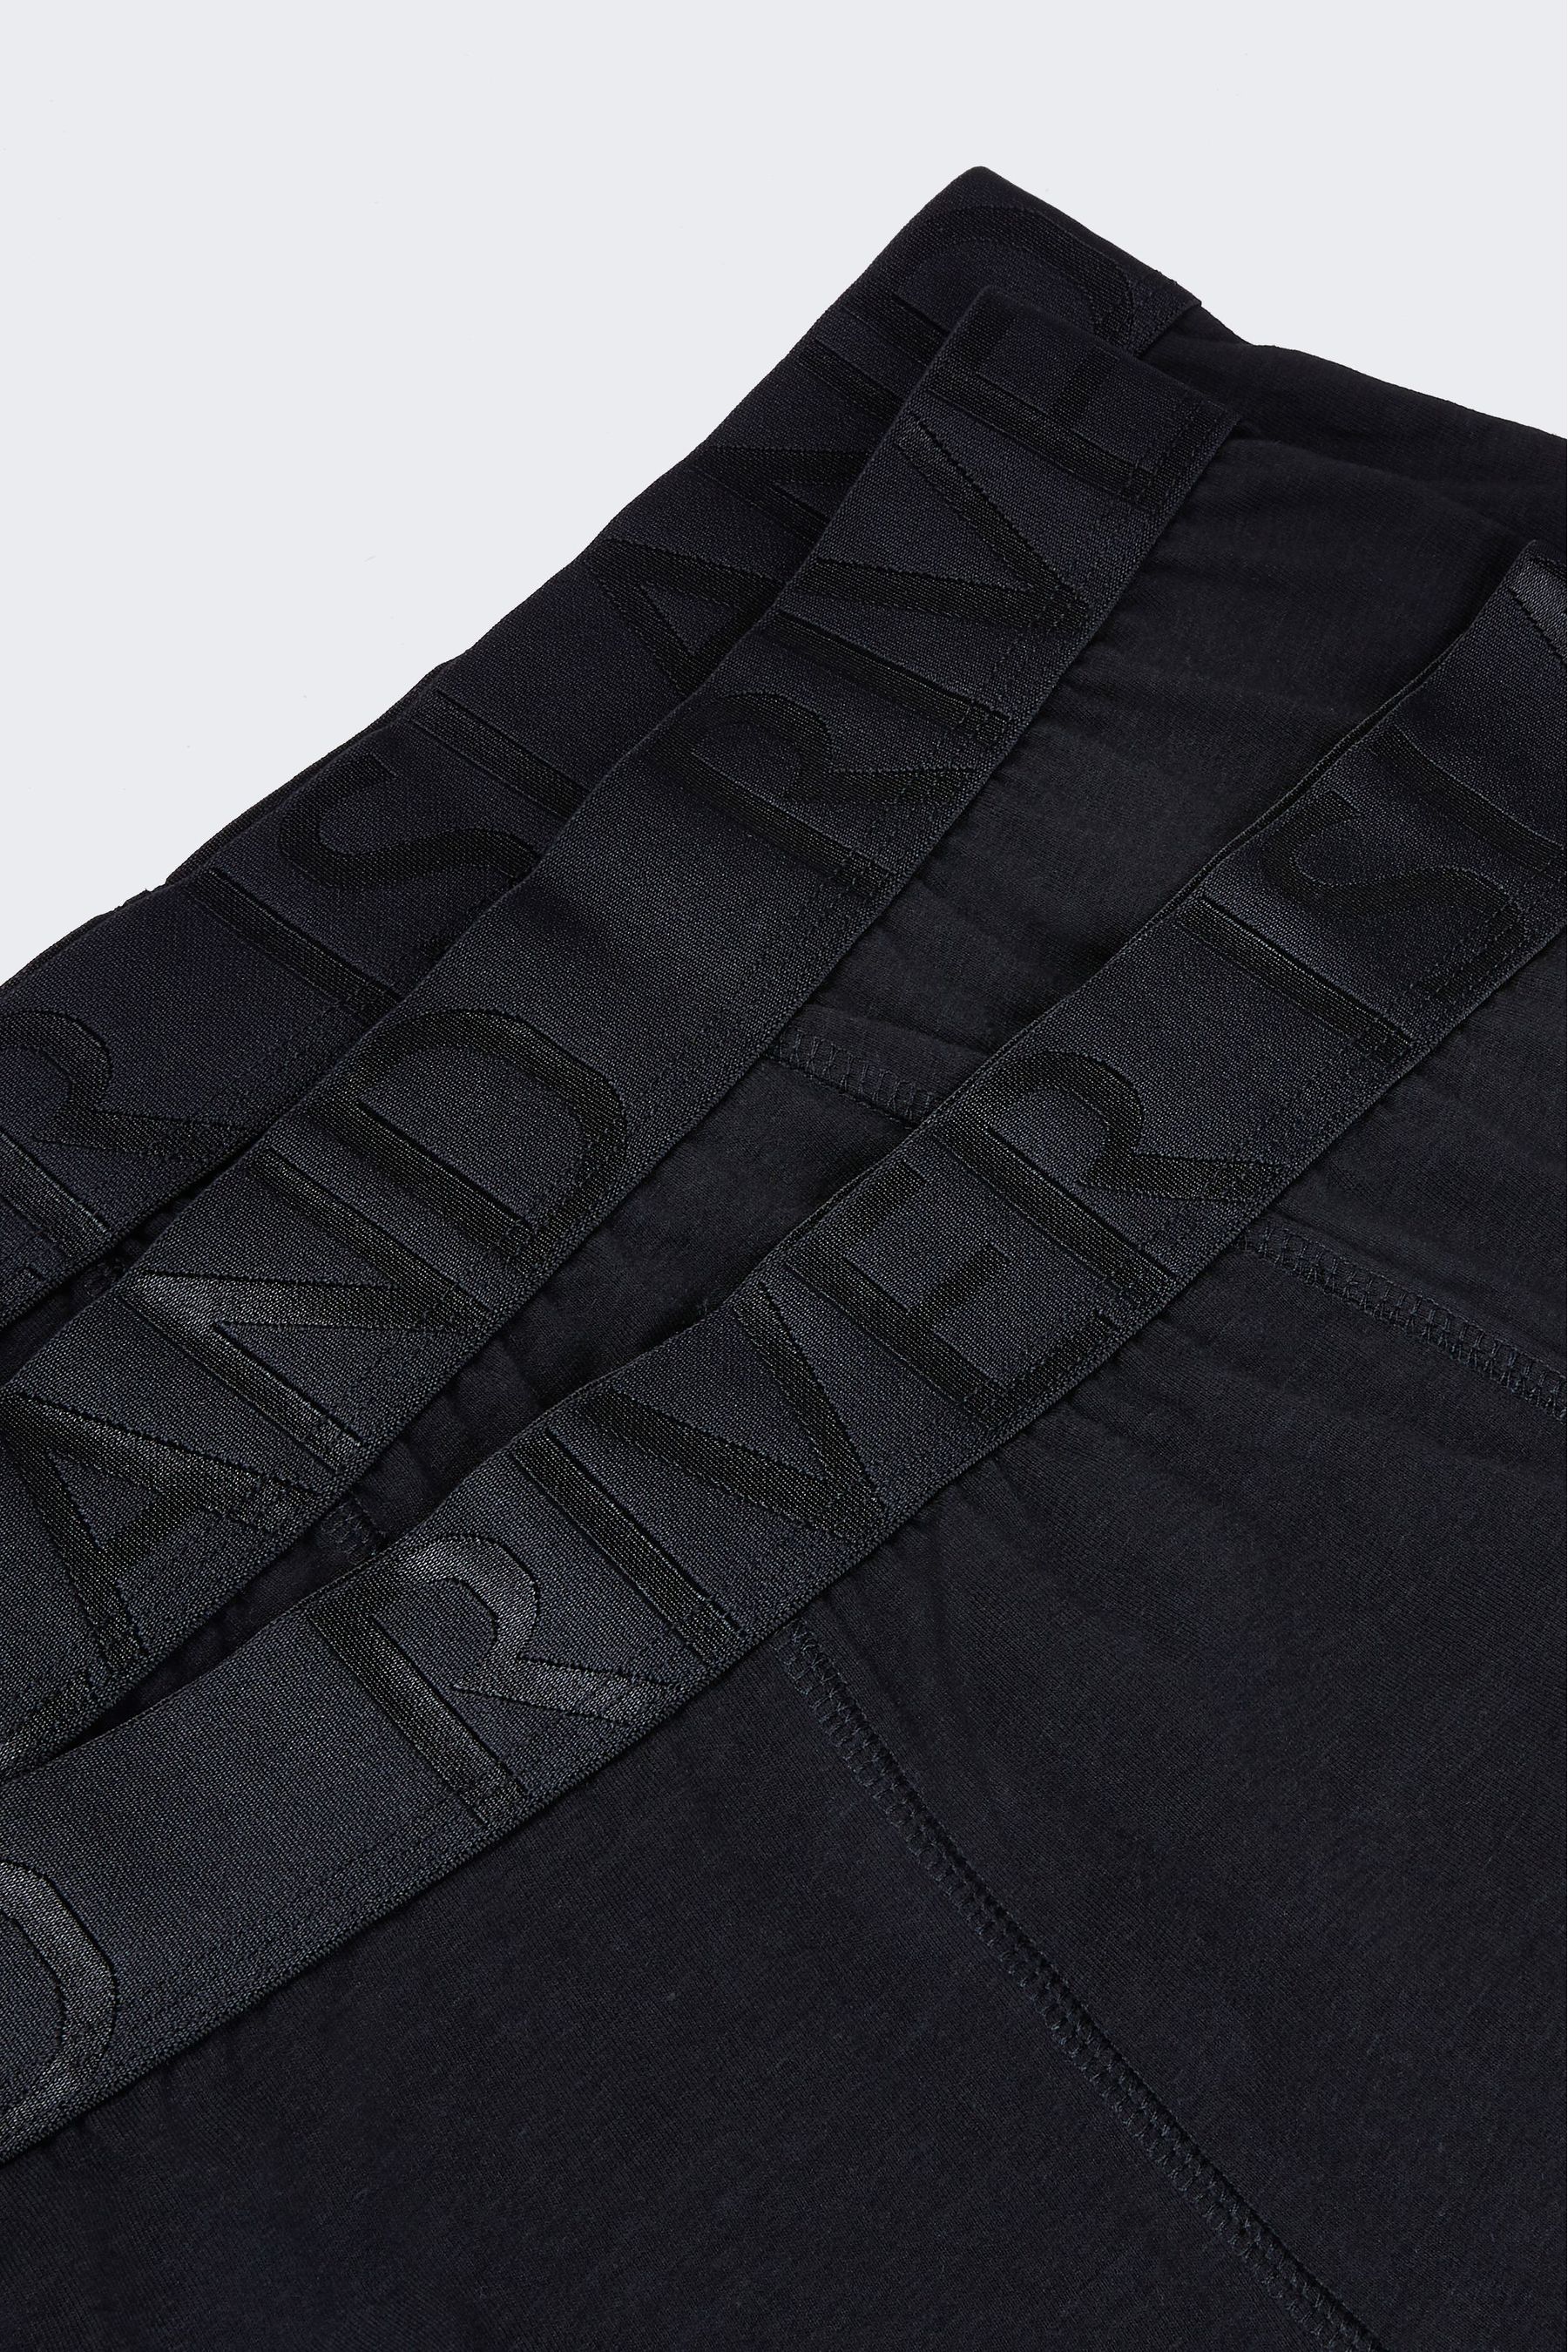 Buy River Island Black Trunks from the Next UK online shop